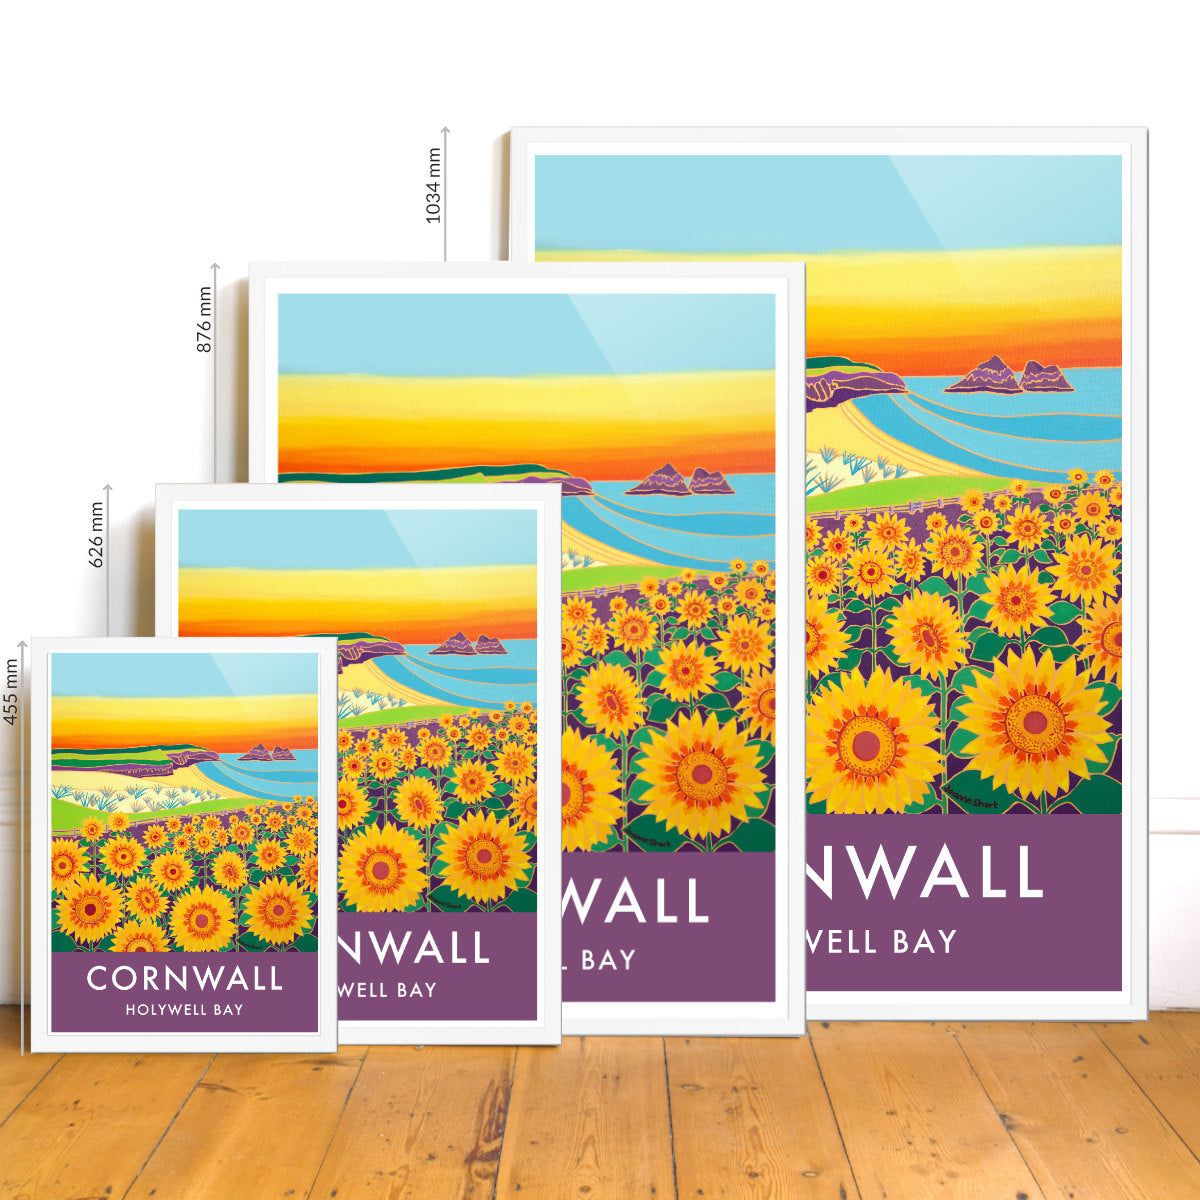 Holywell Bay Beach Sunflowers Sunset. Art Prints of Cornwall by Cornish Artist Joanne Short. Vintage Style Poster Print Art for Homes from our Cornwall Art Gallery